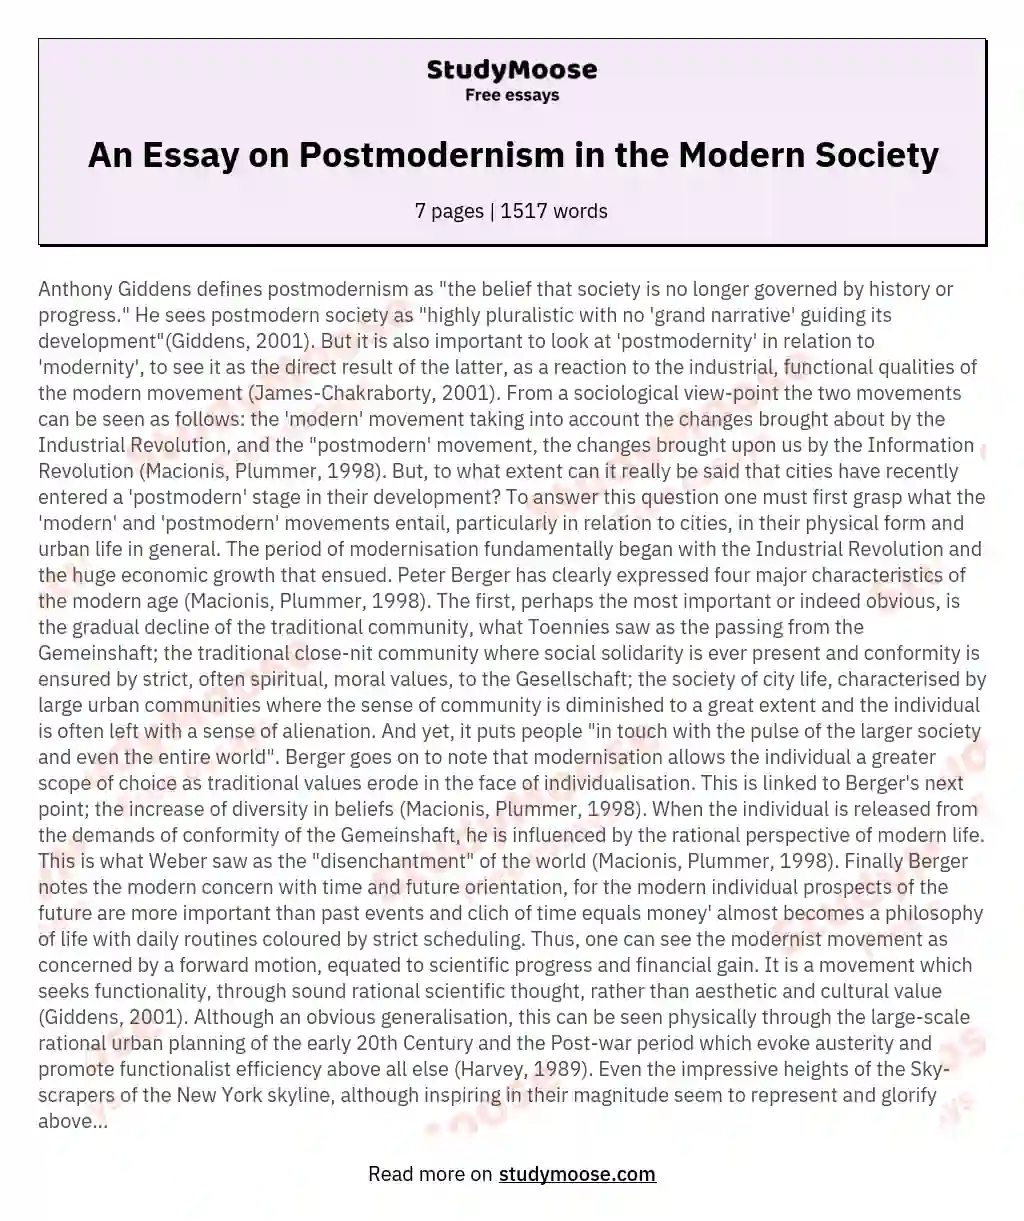 An Essay on Postmodernism in the Modern Society essay